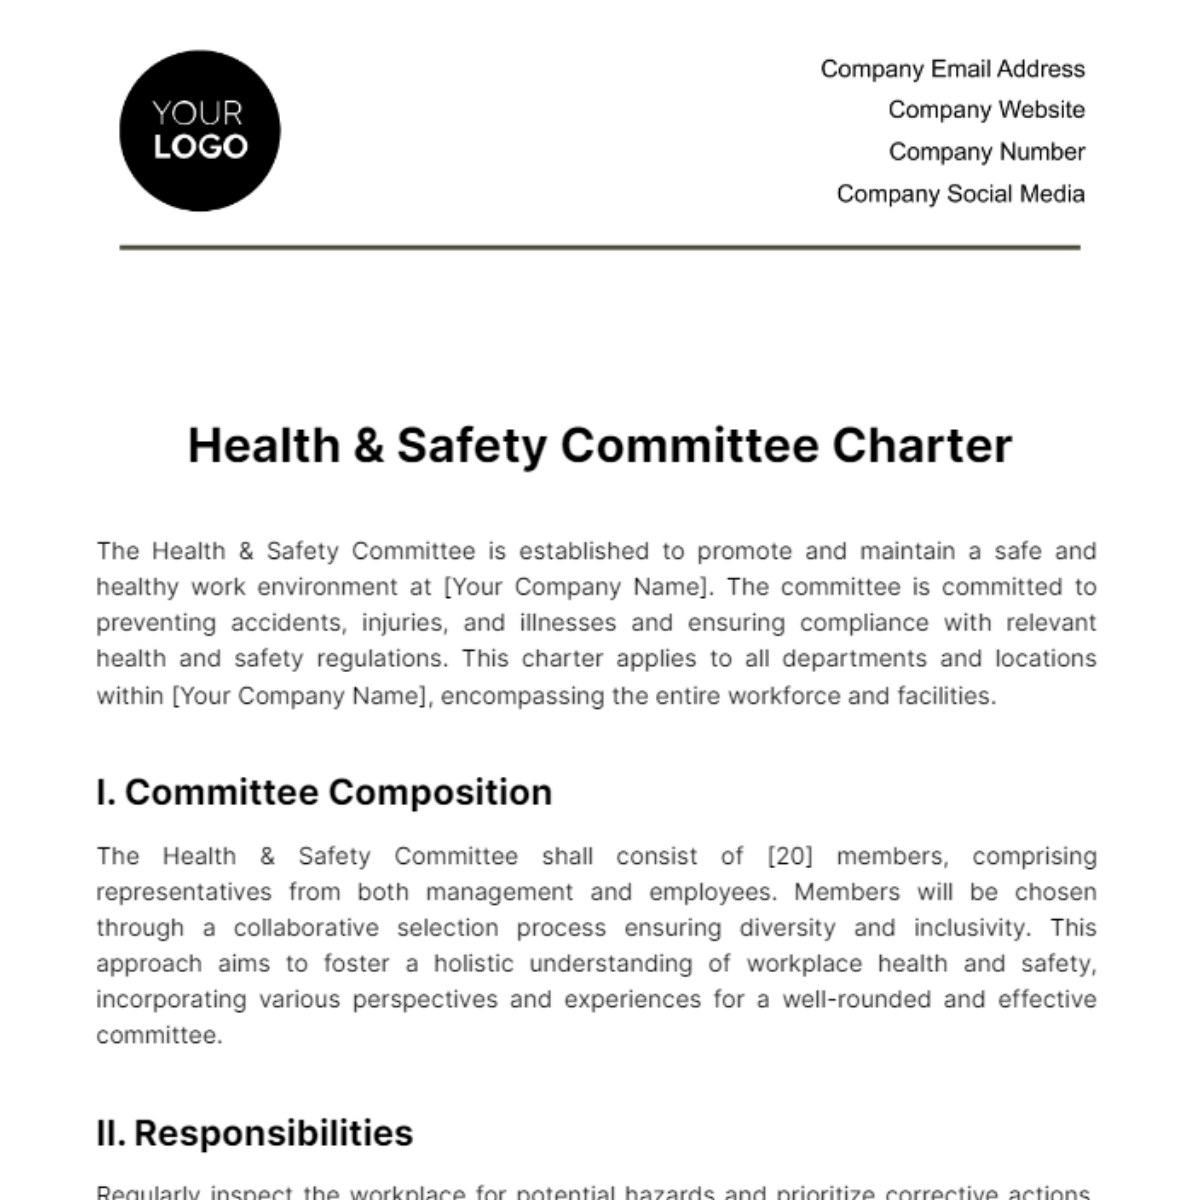 Health & Safety Committee Charter Template